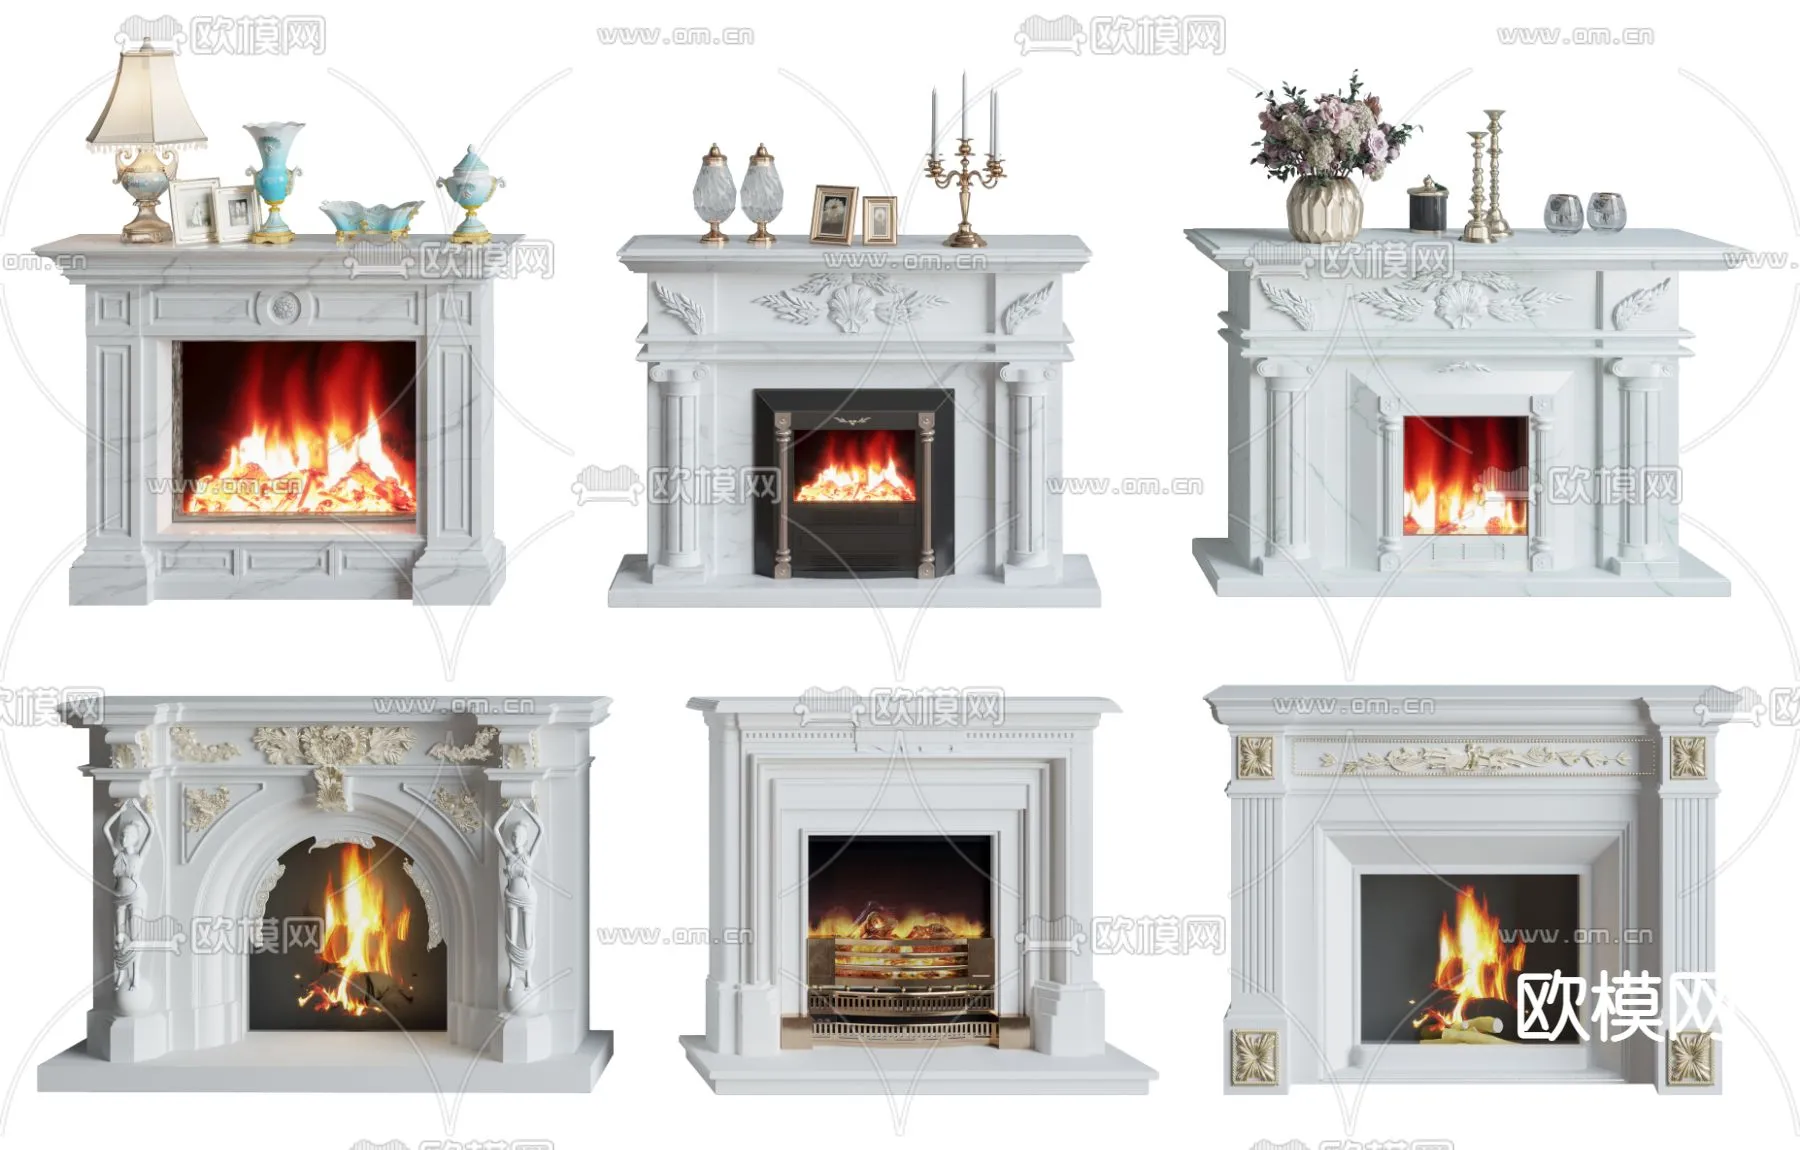 CLASSIC – FIREPLACE 3DMODELS – 064